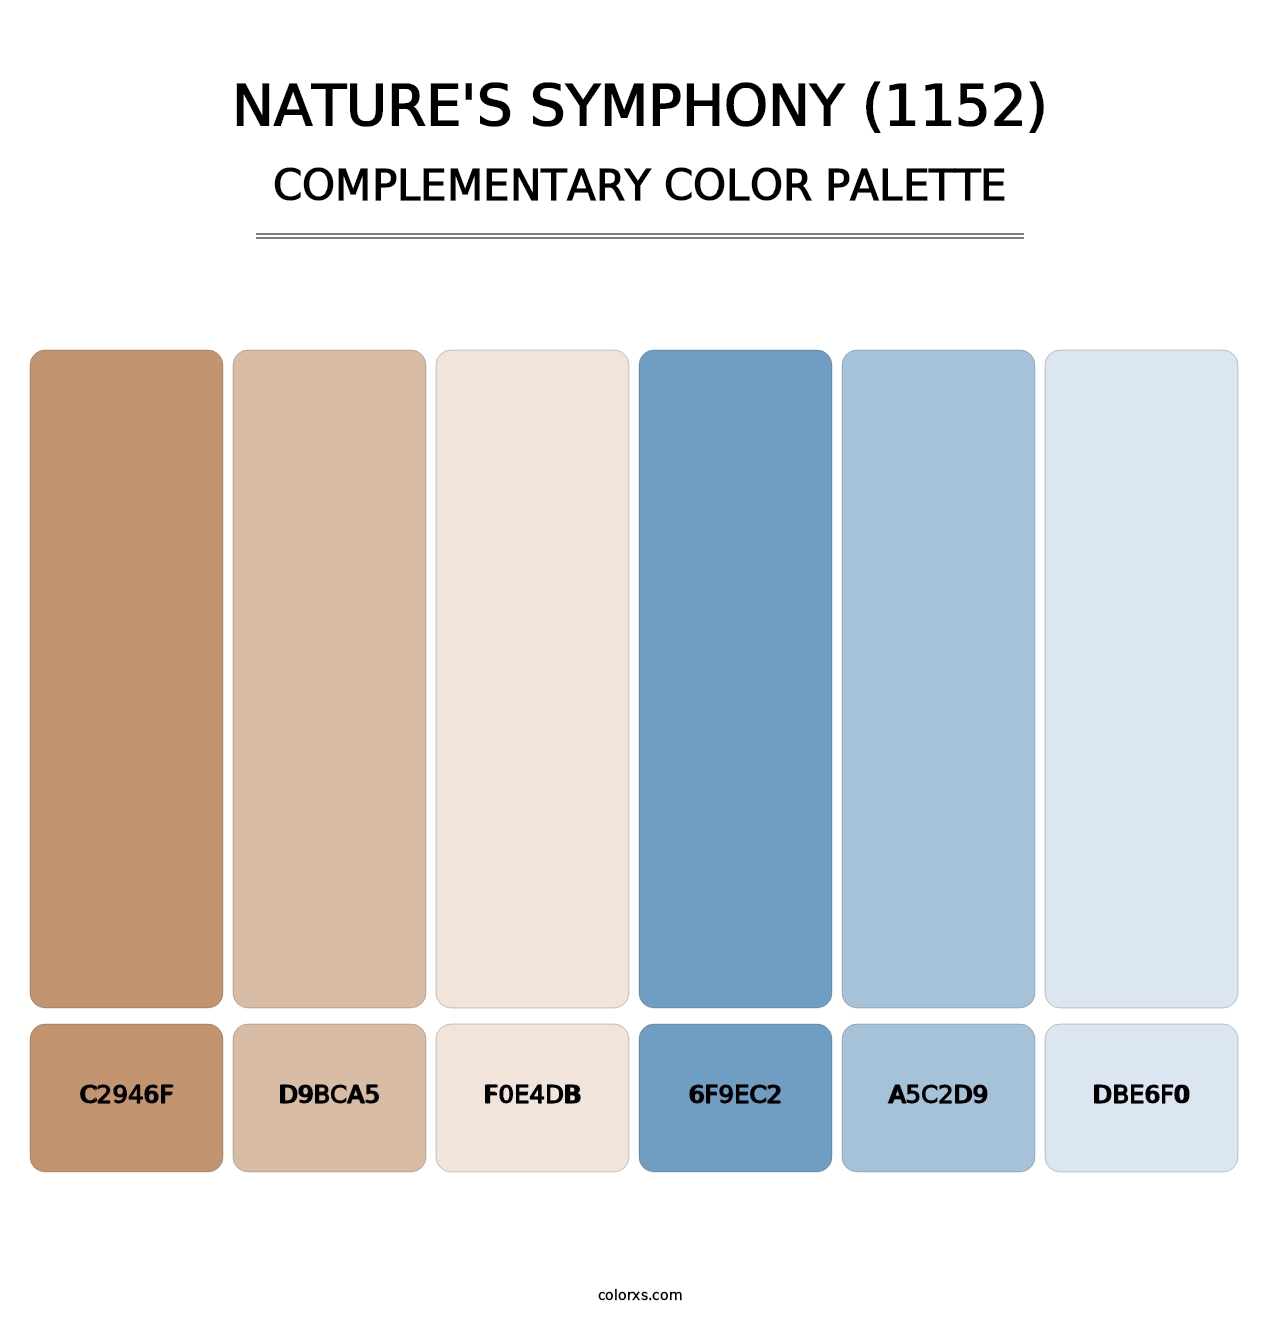 Nature's Symphony (1152) - Complementary Color Palette